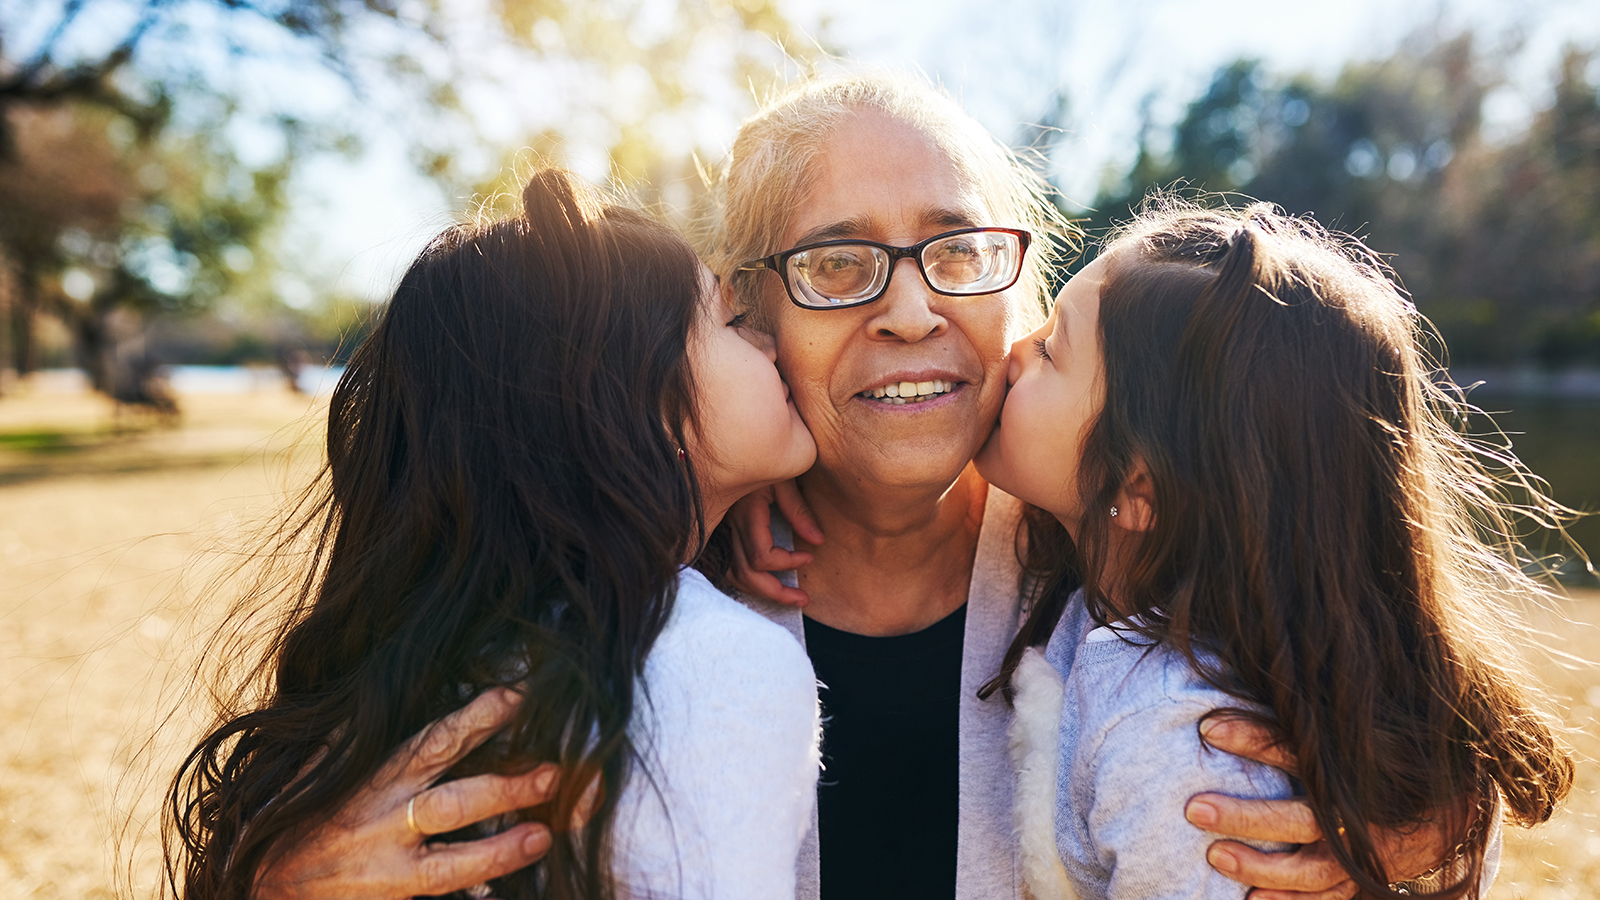 Elderly woman gets a kiss on each cheek from her granddaughters.